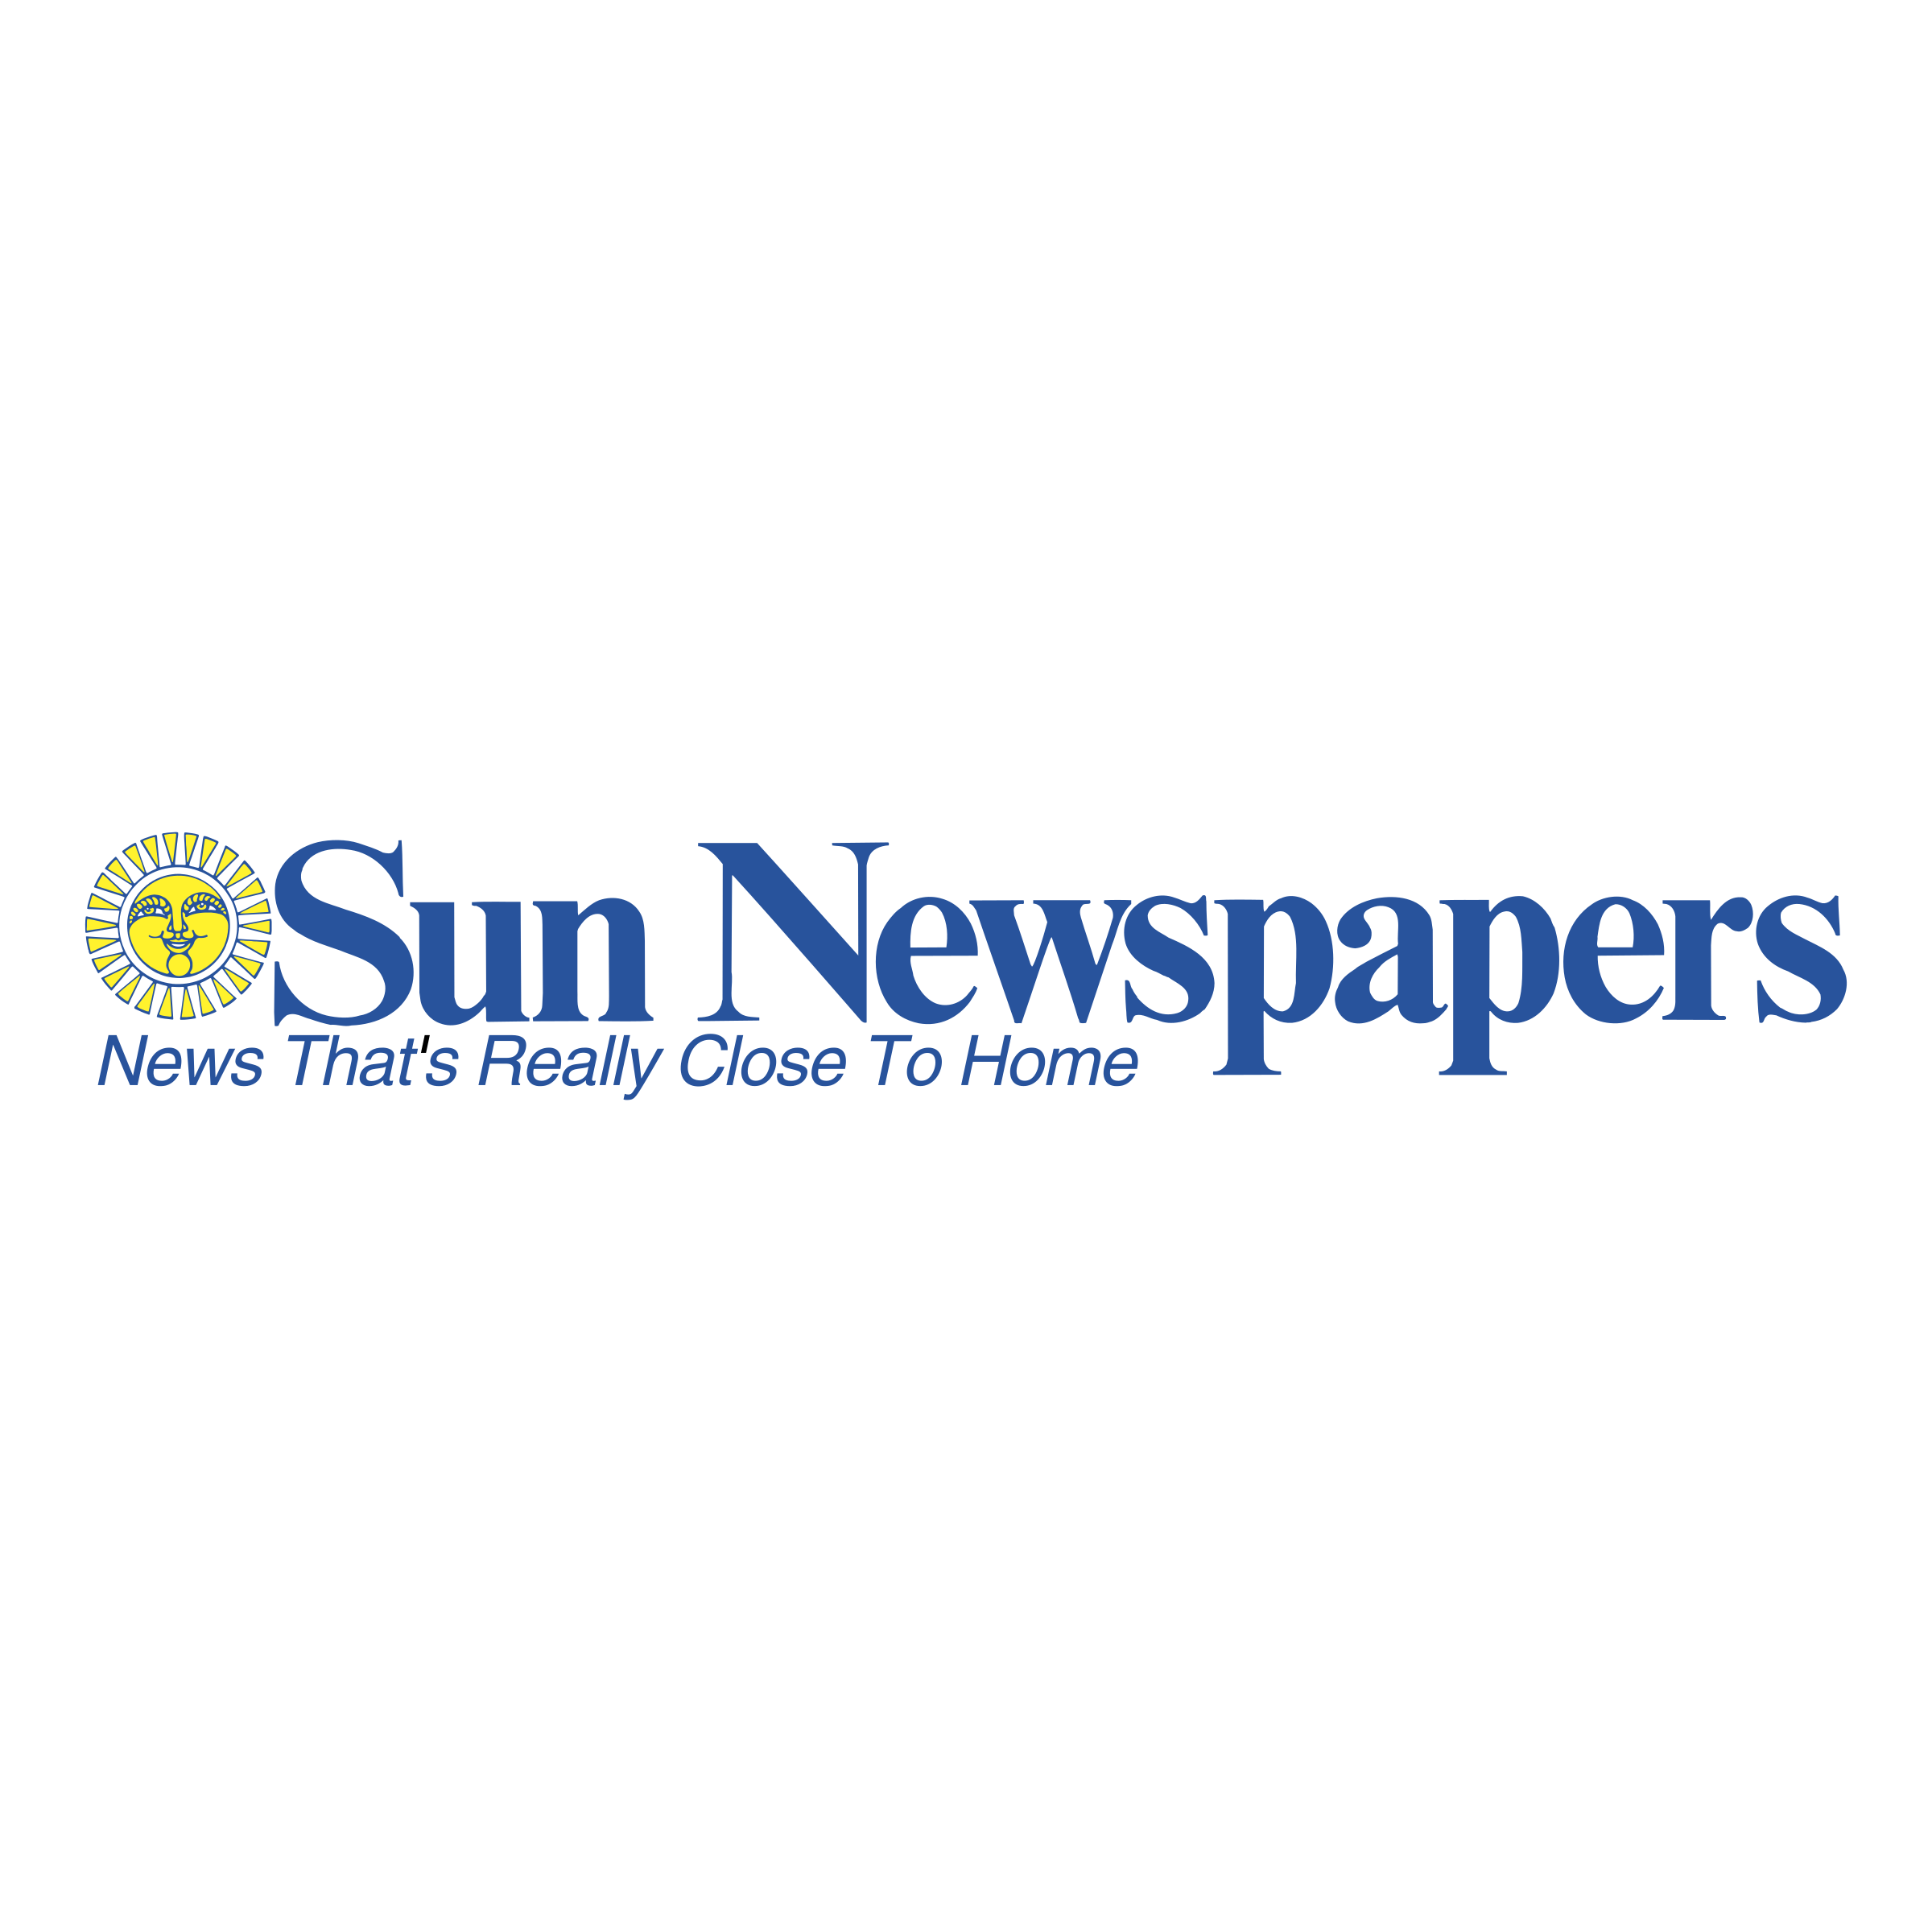 Newspapers Logo - Sun Newspapers Logo PNG Transparent & SVG Vector - Freebie Supply